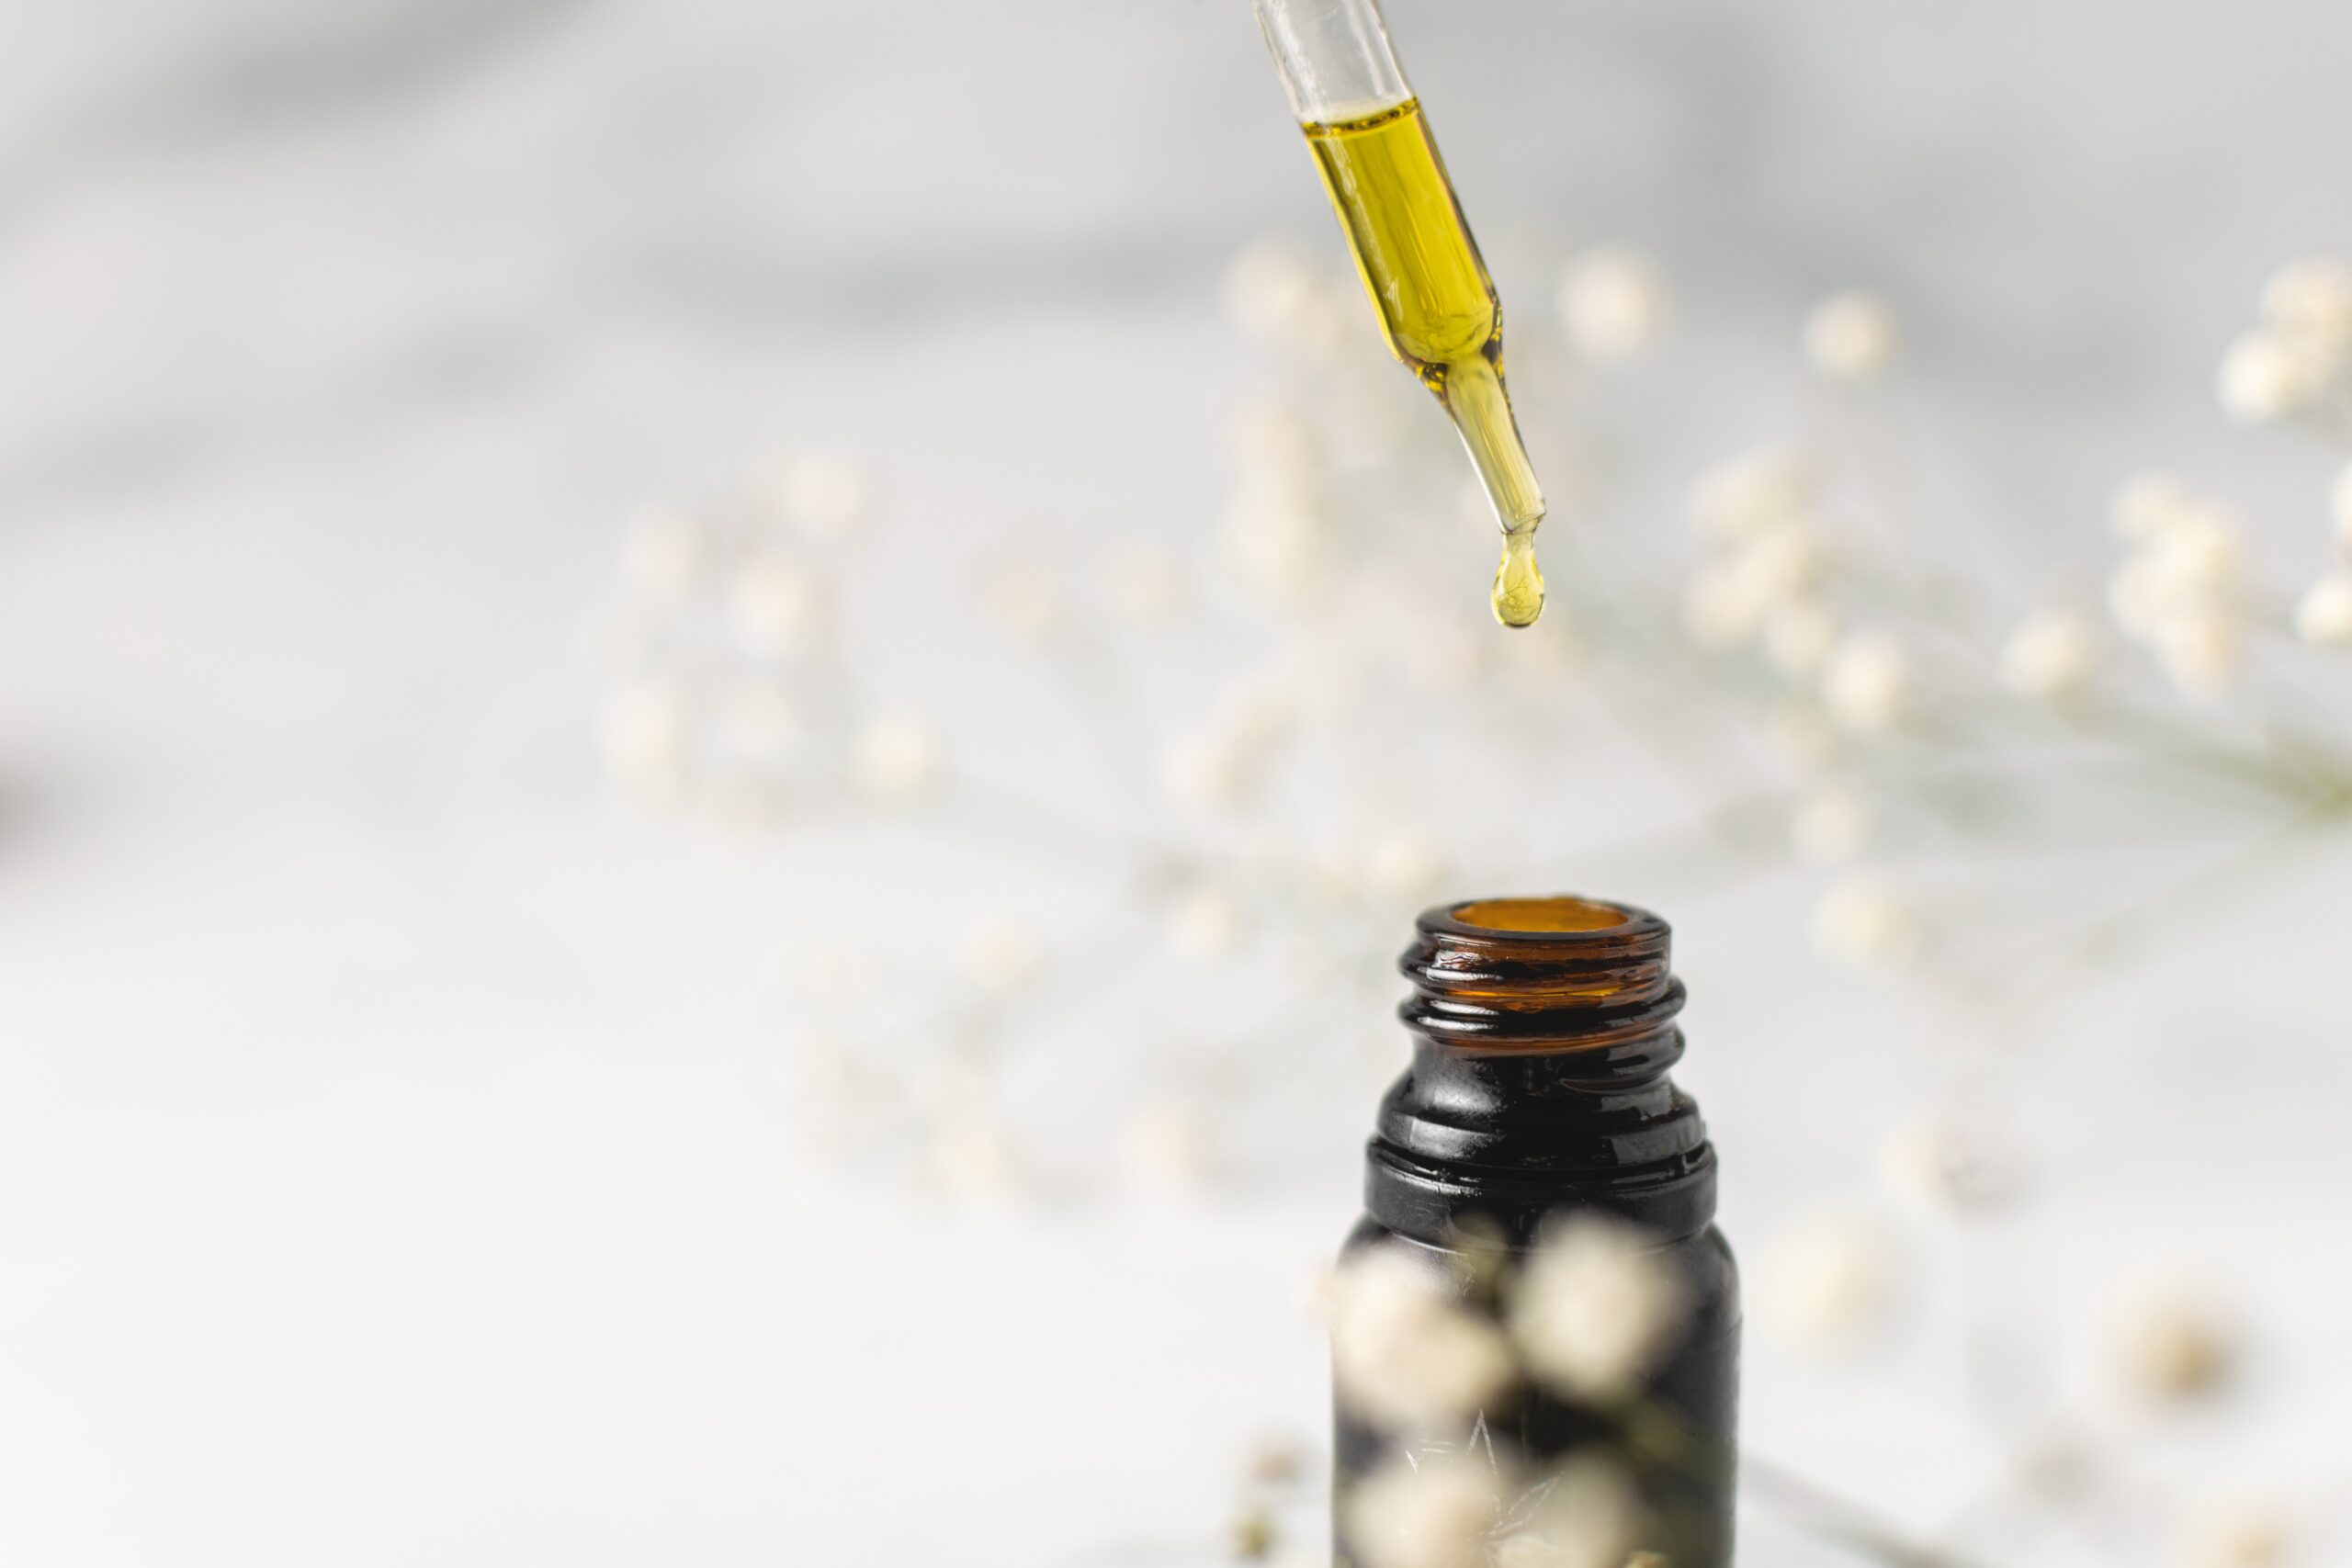 Are there side effects when taking more than the recommended amount of CBD oil?